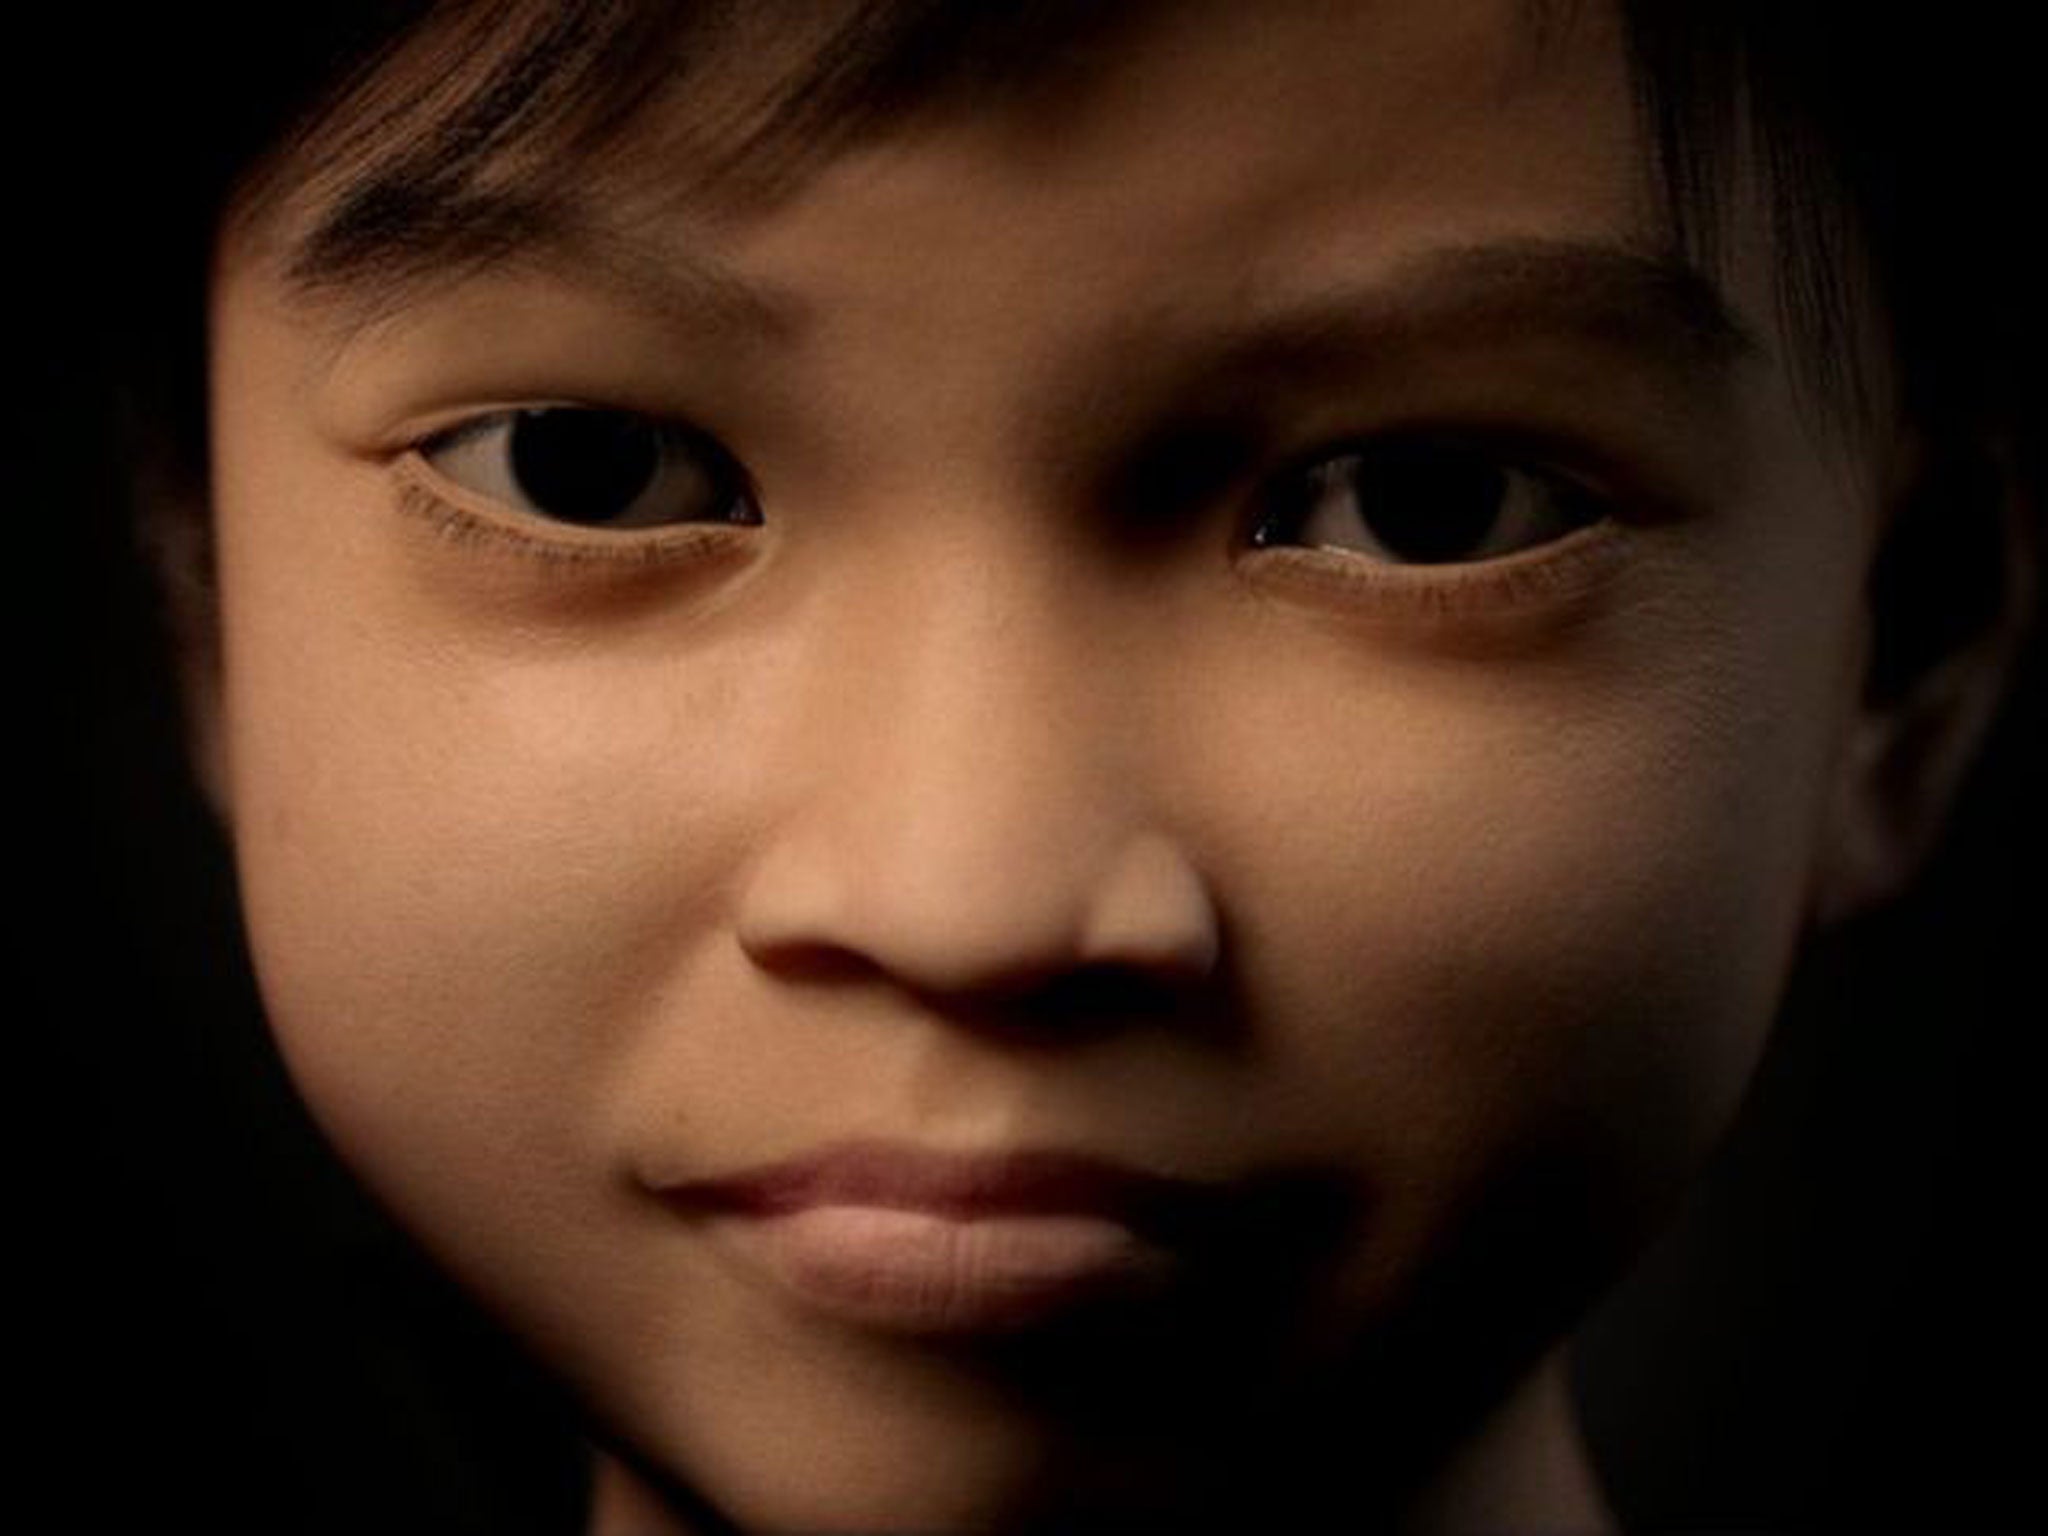 A computer-generated image made available by Terres des Hommes shows virtual alias 'Sweetie' designed as the face of a 10-year-old Filipino girl